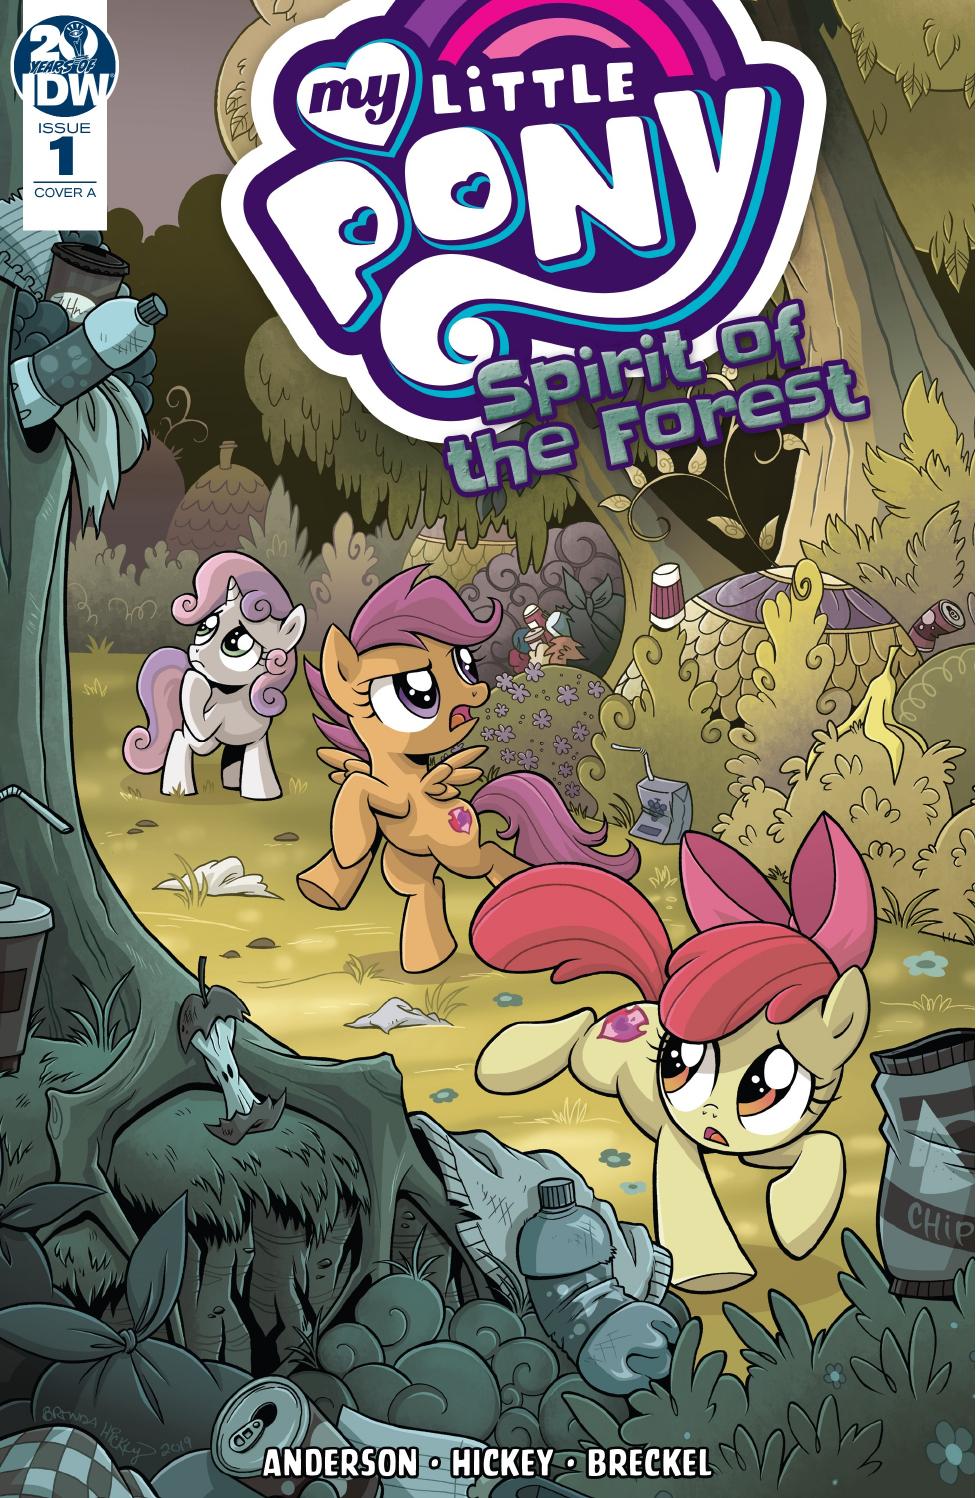 My Little Pony, Spirit of the Forest #1 by Ted Anderson Brenda Hickey